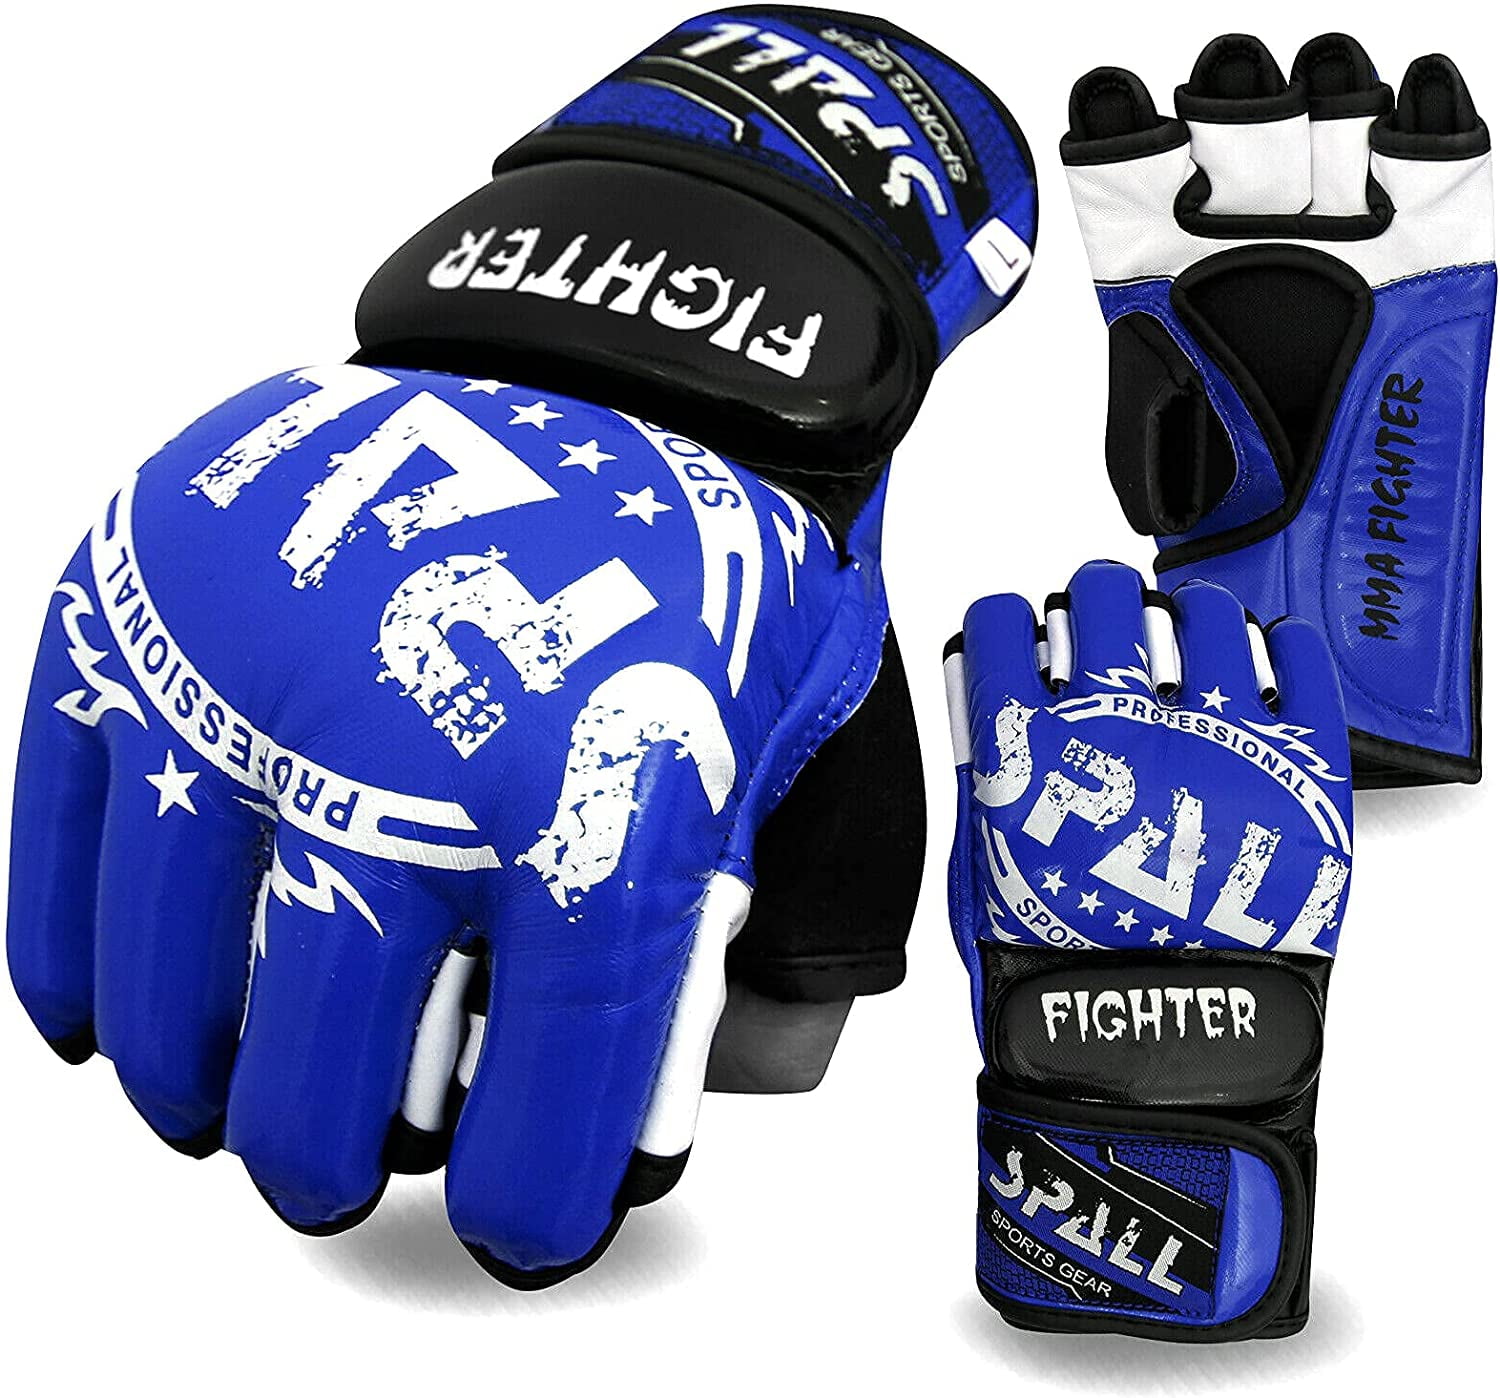 Finger for and Martial Grappling Pro - Gloves Gloves, Band UFC, Half for Adjustable MMA Spall Large) Arts Gloves (Blue, Training Unisex Wrist Gloves Boxing Boxing